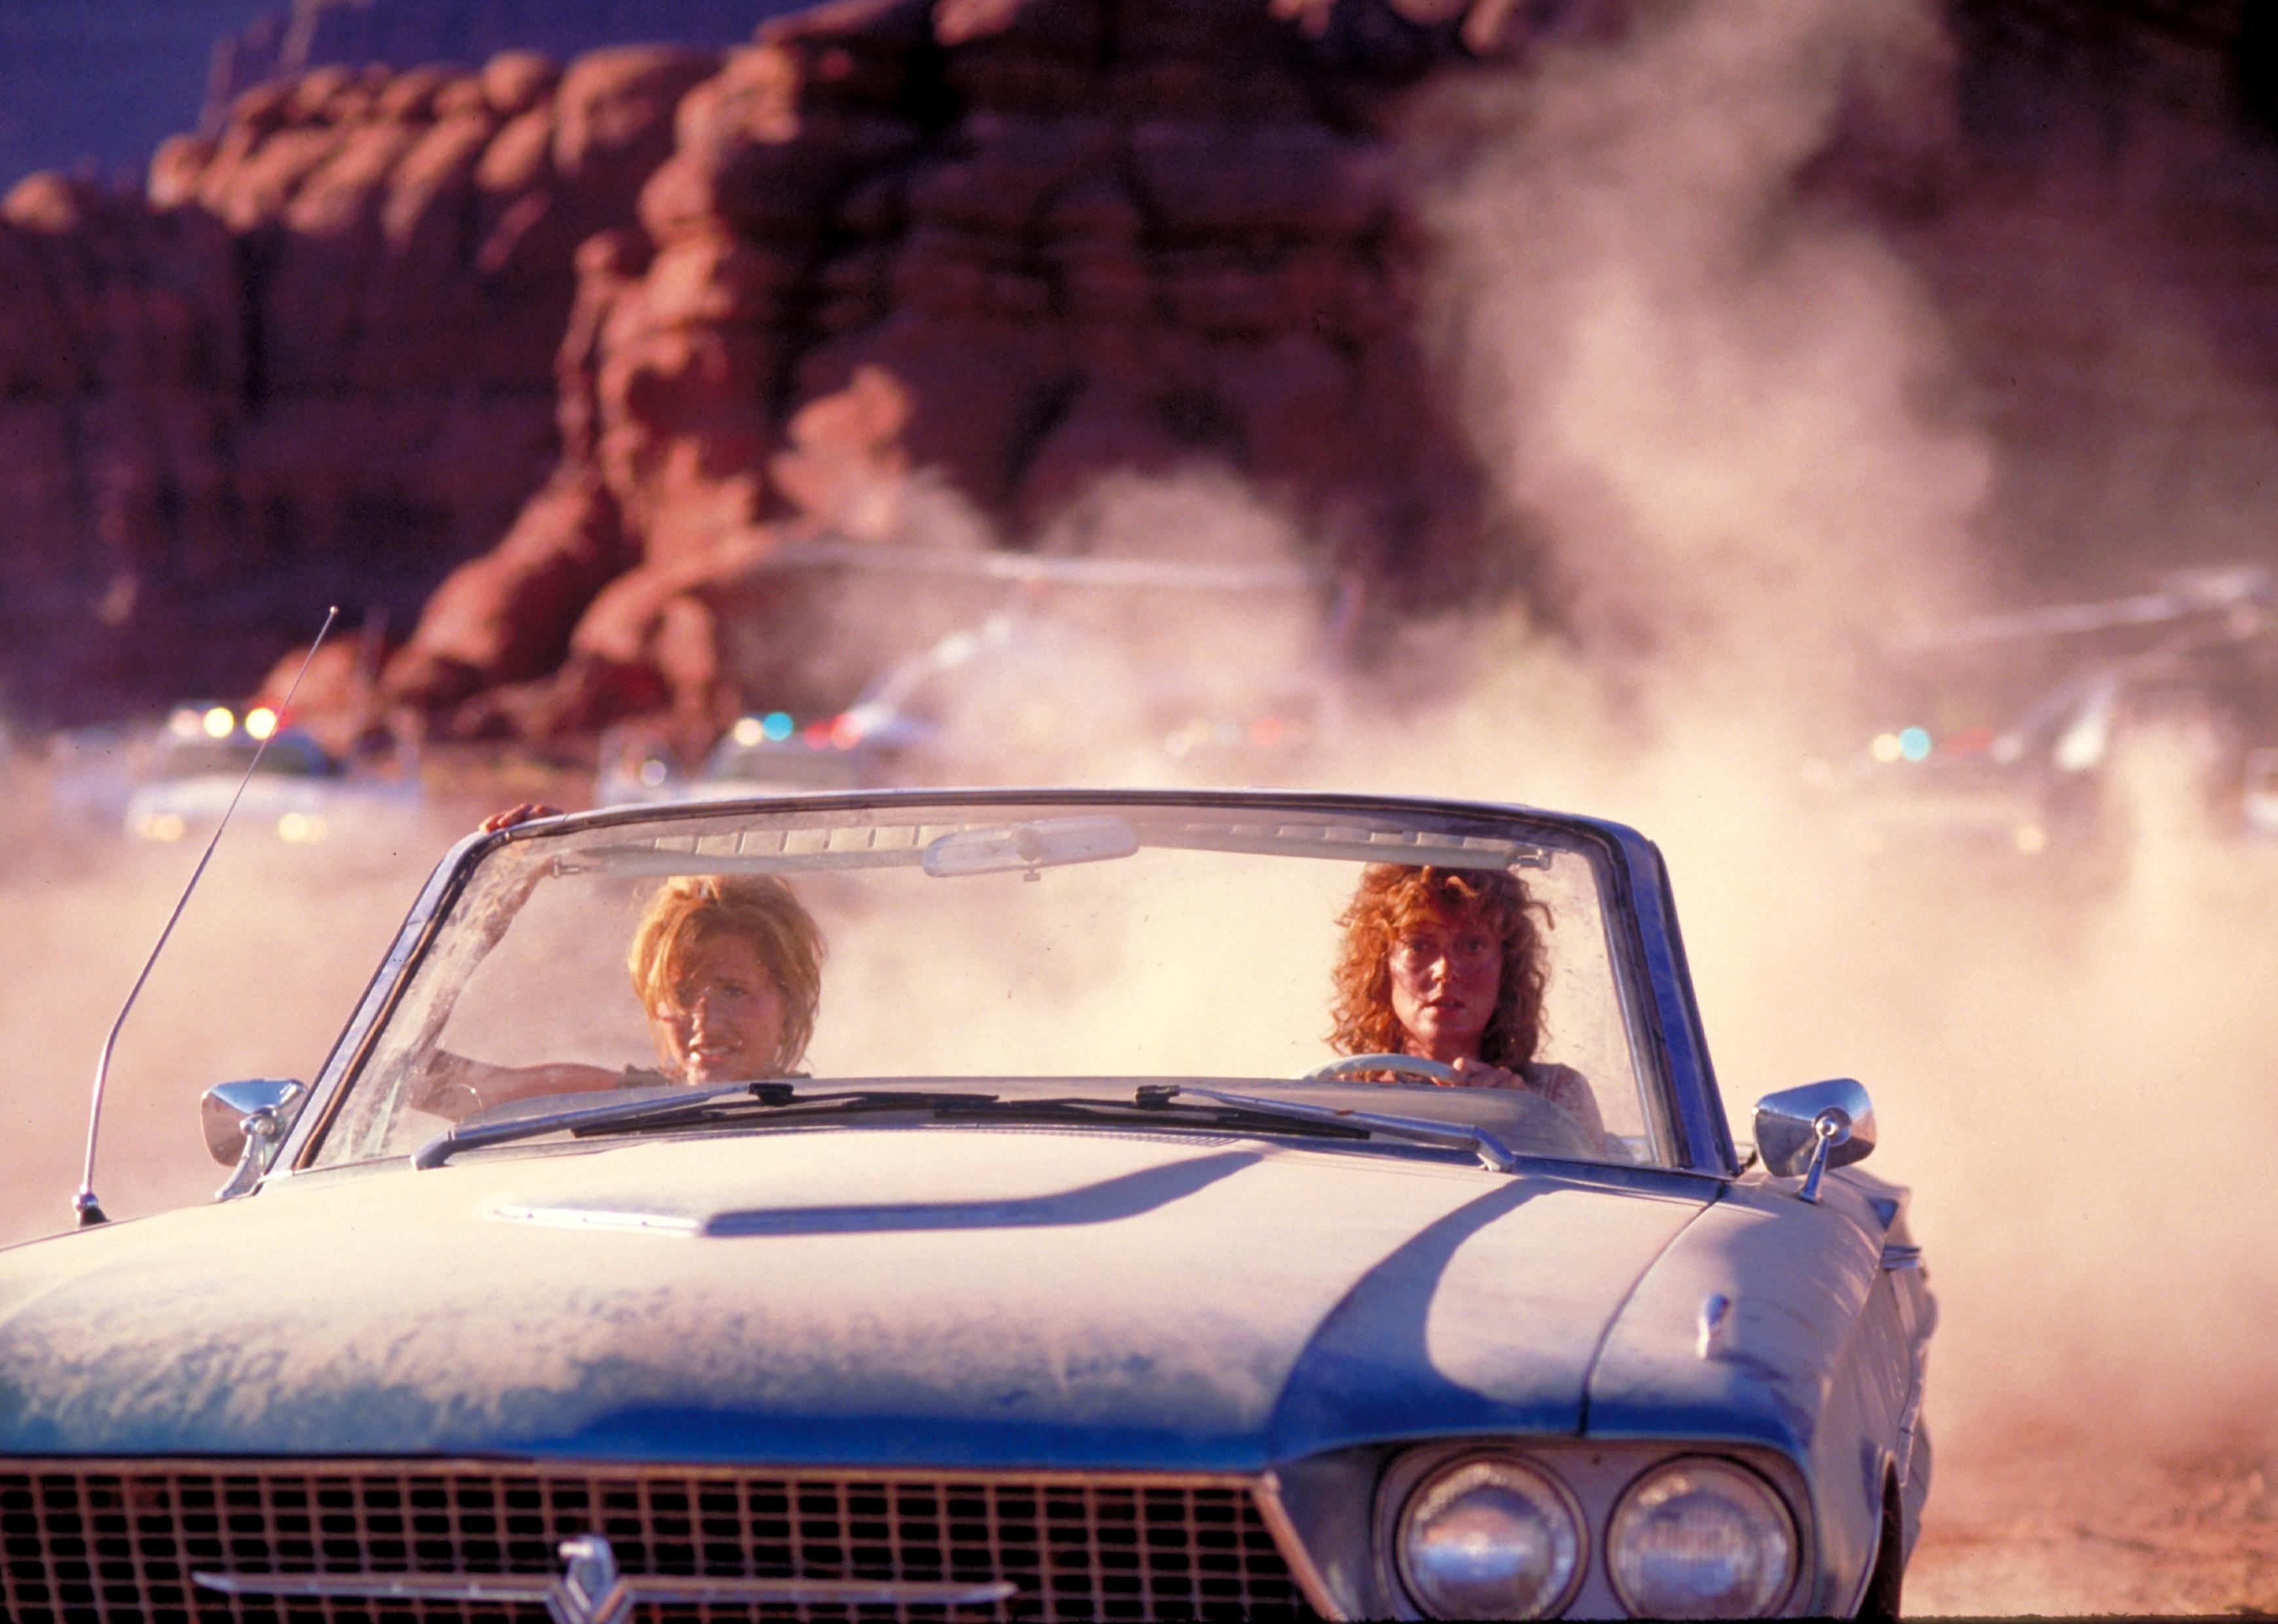 <p>- Director: Ridley Scott<br> - IMDb user rating: 7.5<br> - Metascore: 88<br> - Runtime: 130 minutes</p>  <p>Among director Ridley Scott's earliest films is "Thelma & Louise," a star-studded, female-led road trip flick that revolutionized the buddy comedy genre.</p>  <p>In the movie, Thelma (Geena Davis) and Louise (Susan Sarandon) are friends in very different eras of their lives who find themselves running from the authorities after killing a man who attempted to rape one of them.</p>  <p>The two have very different ideas on moving forward after the incident and ultimately criss-cross the country in a hilarious crime spree.</p>  <p>In the movie, you'll see Brad Pitt in one of his earliest roles, along with Harvey Keitel. Sarandon and Davis were both nominated for best actress in the 1991 Academy Awards.</p>